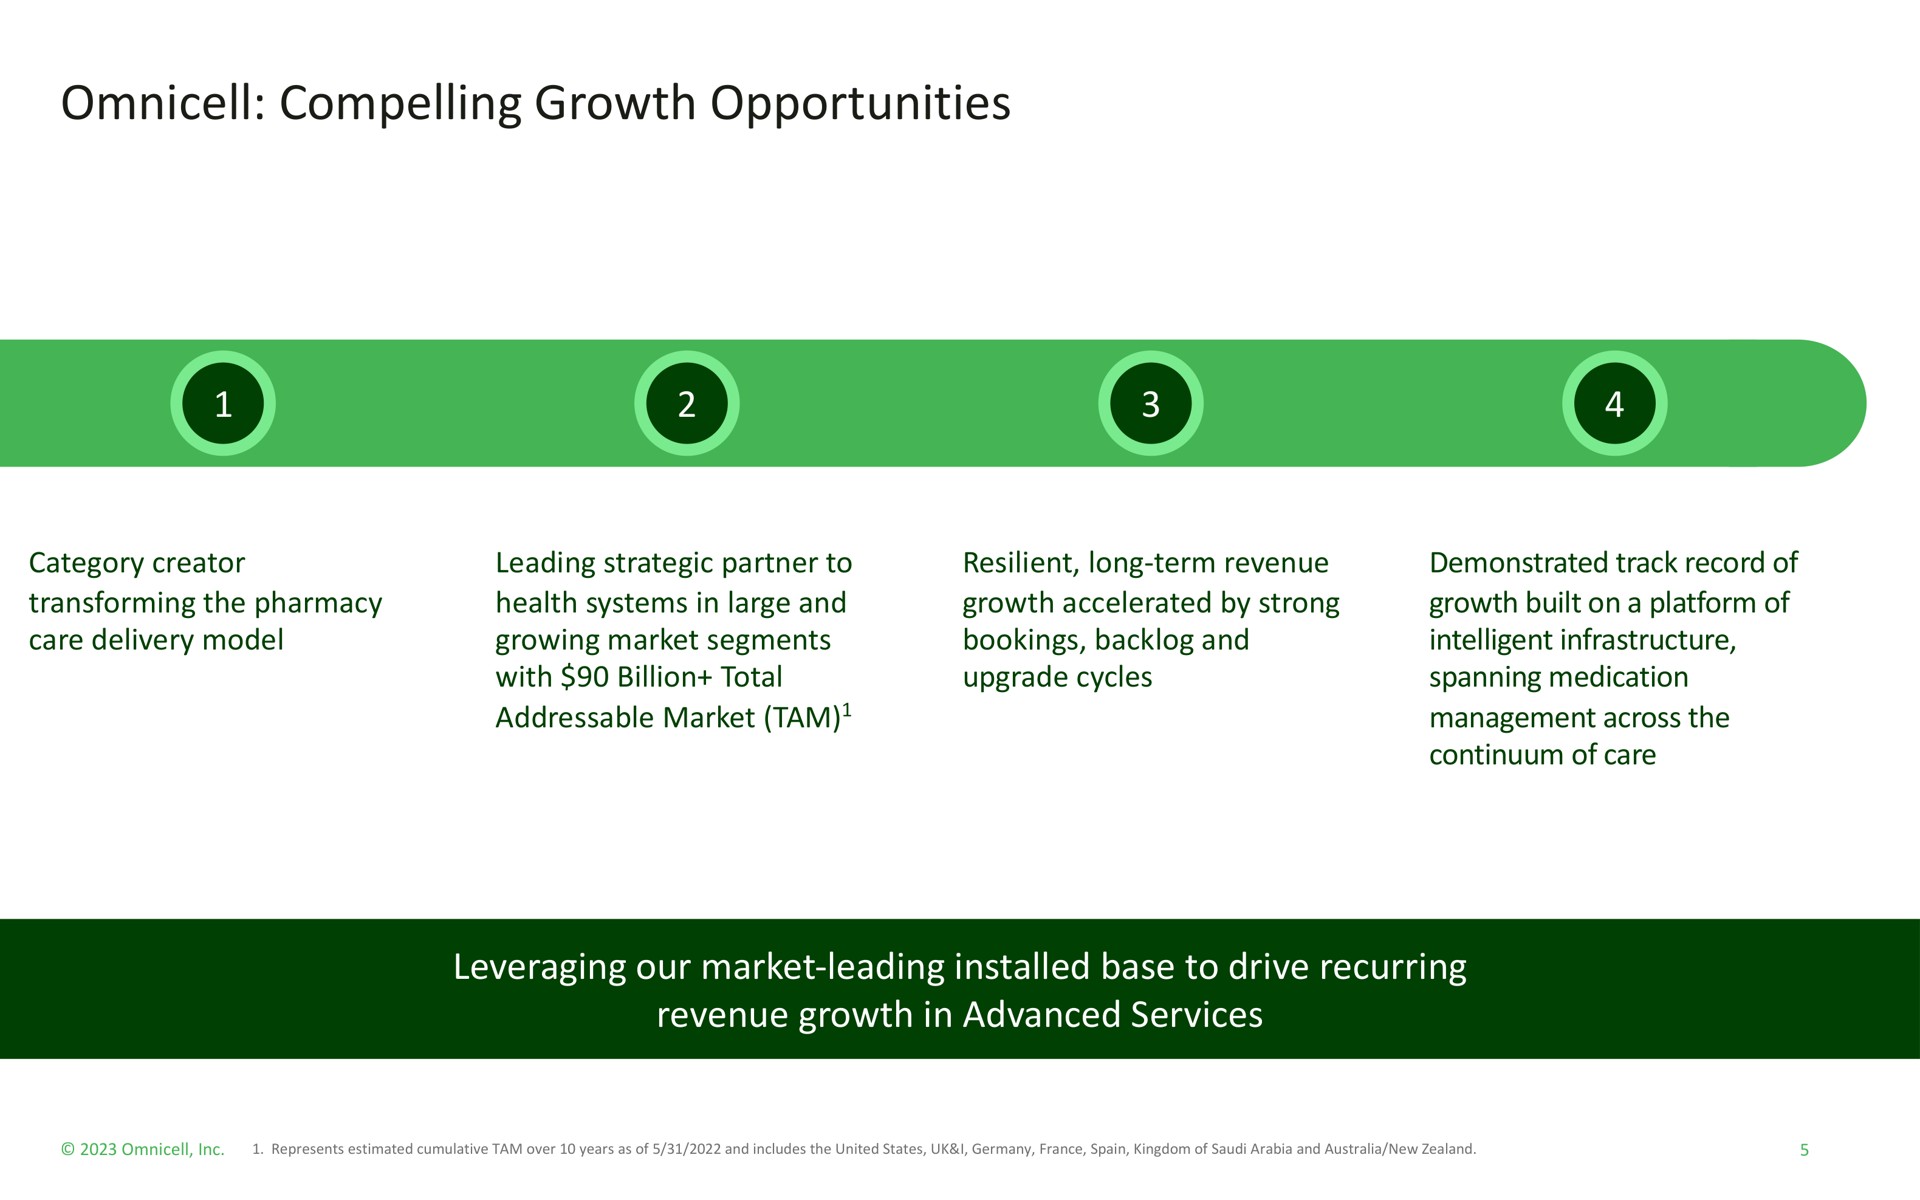 compelling growth opportunities leveraging our market leading base to drive recurring revenue growth in advanced services | Omnicell